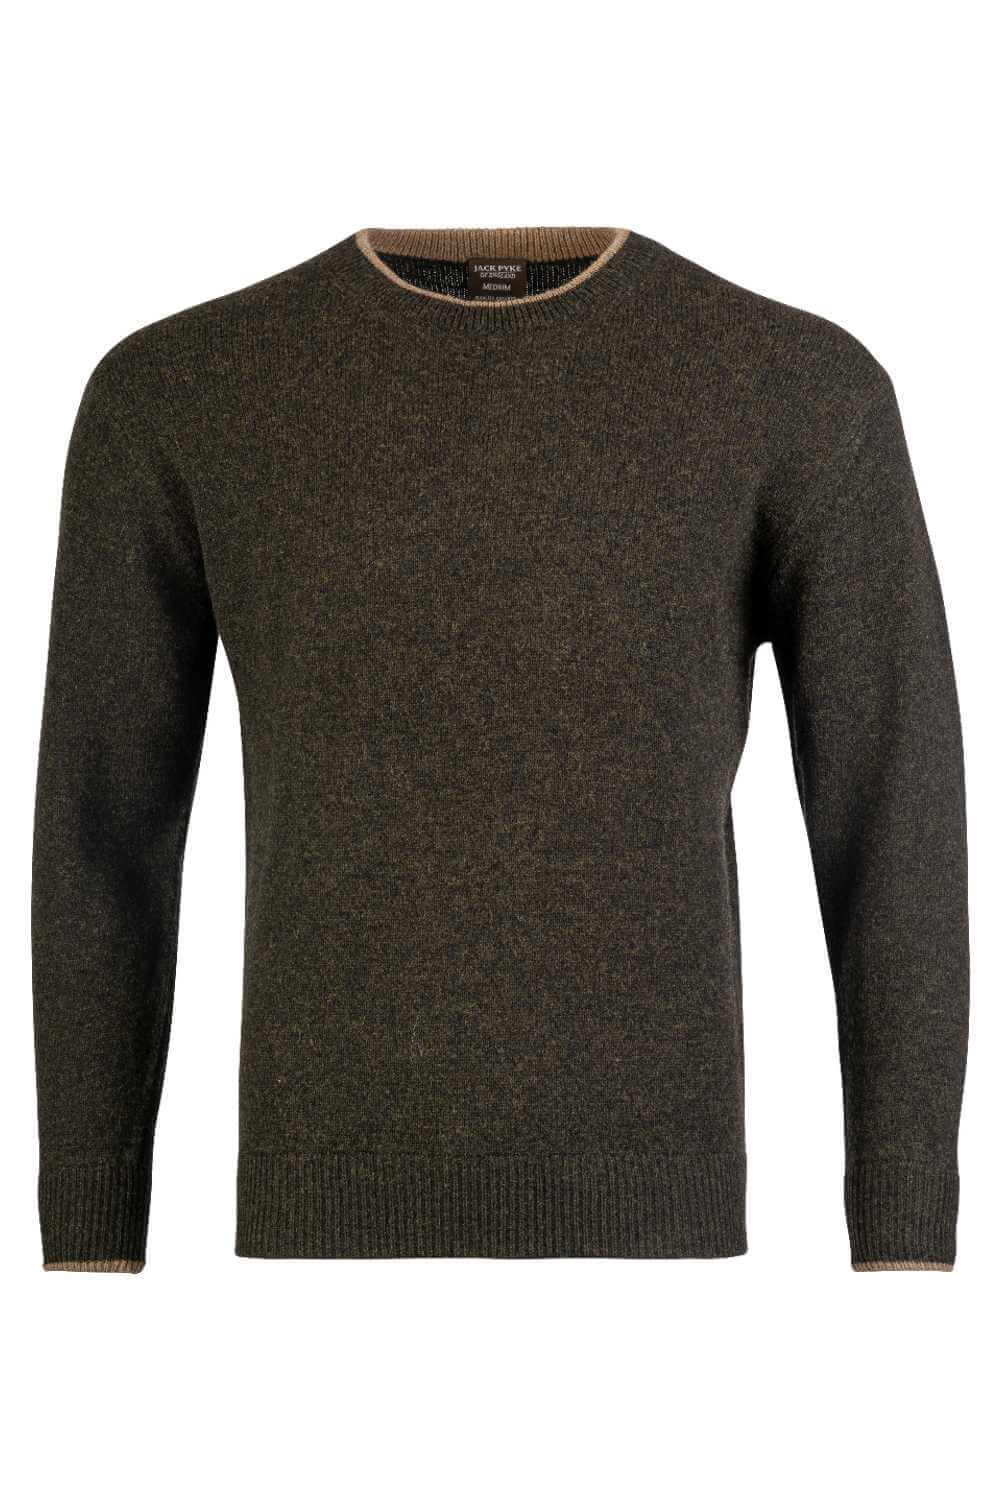 Jack Pyke Ashcombe Lambswool Crewknit Pullover- Dark Olive